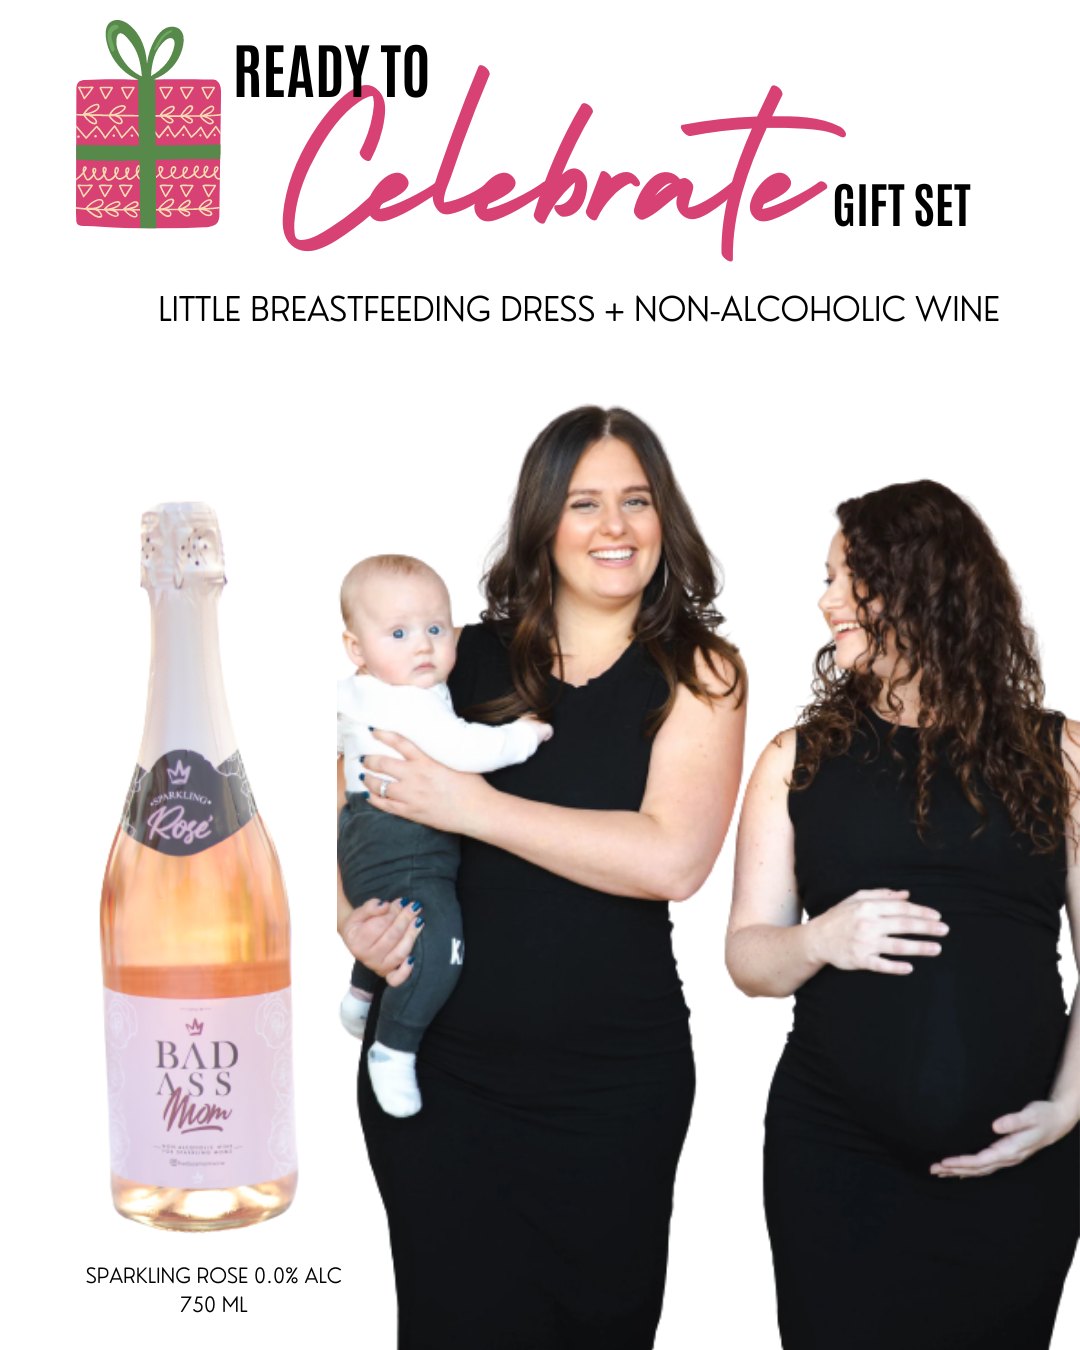 Limited Edition Holiday Gift Set - Little Breastfeeding Dress + Non-Alcoholic Wine